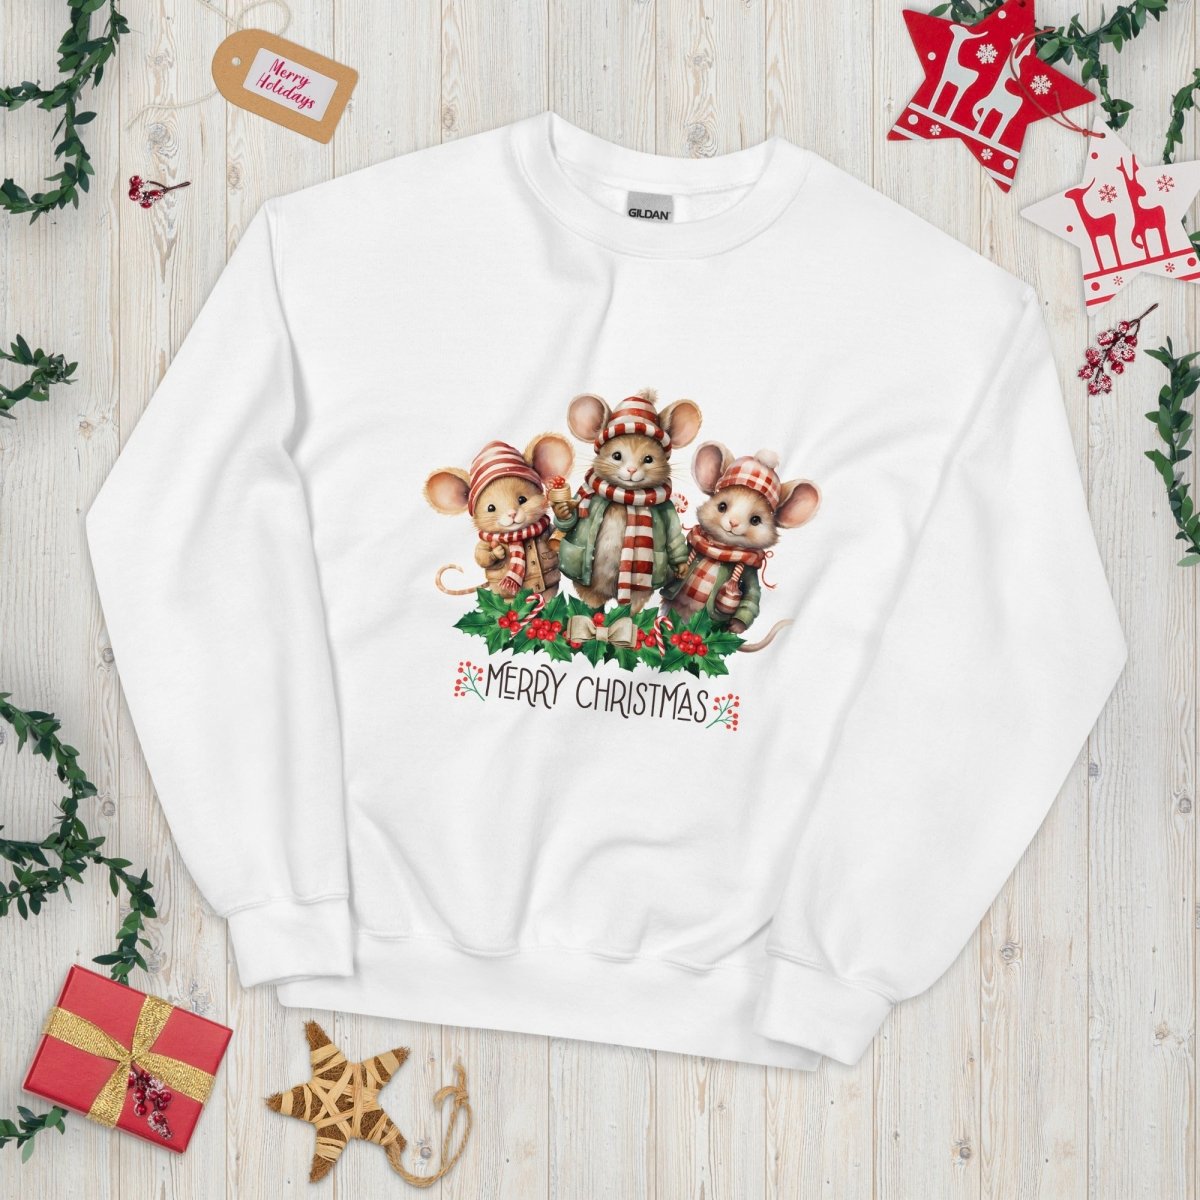 Christmas Mice Pullover - High Quality Festive Family Unisex Sweater, Family Reunion Pullover, Holiday Sweatshirt, Christmas Vacation - Everything Pixel